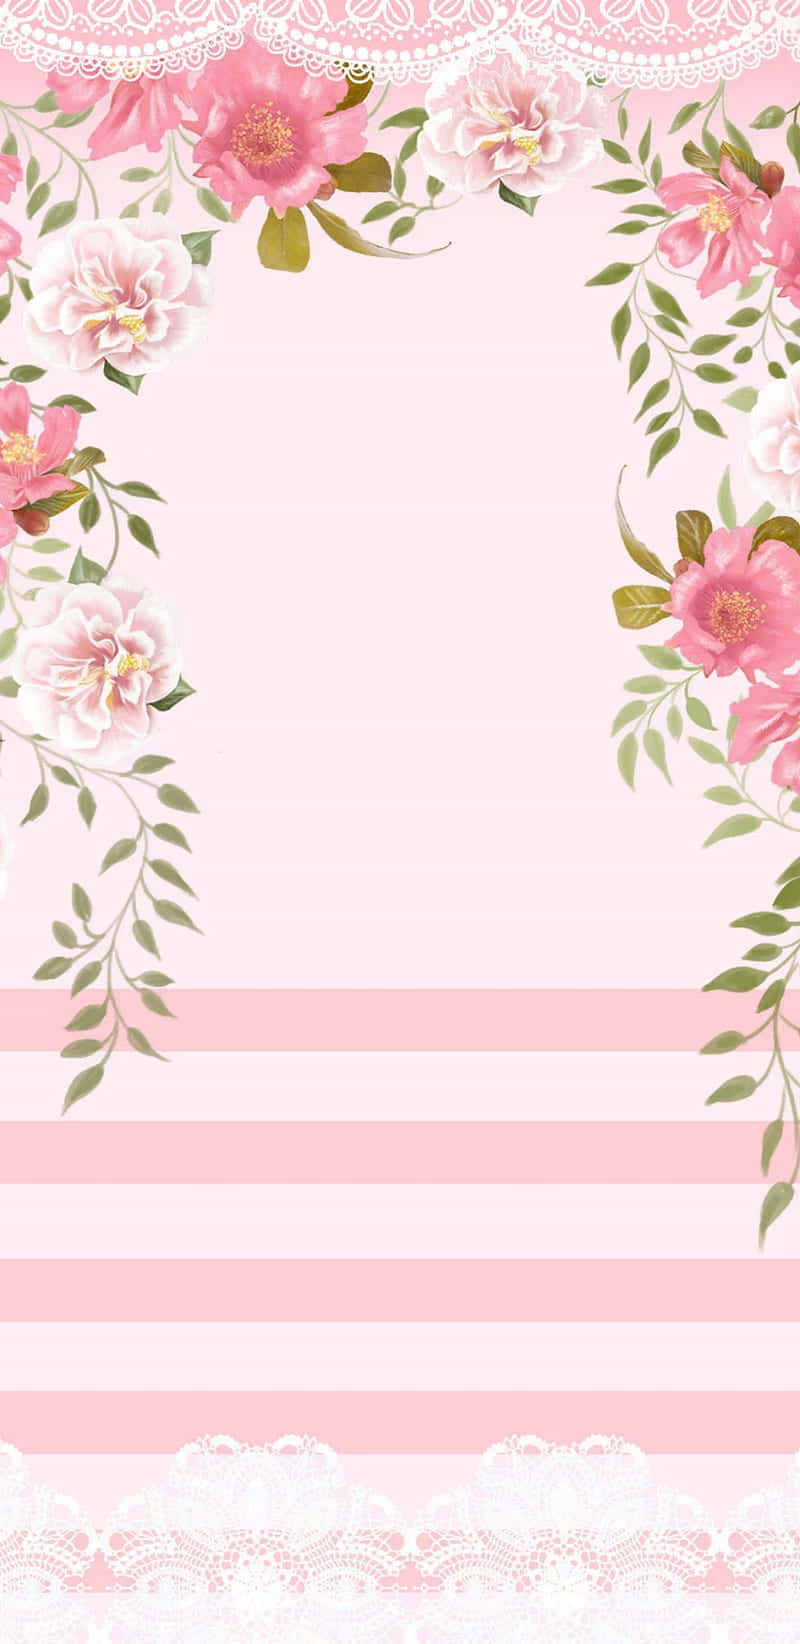 Pink Floral Background With Lace And Flowers